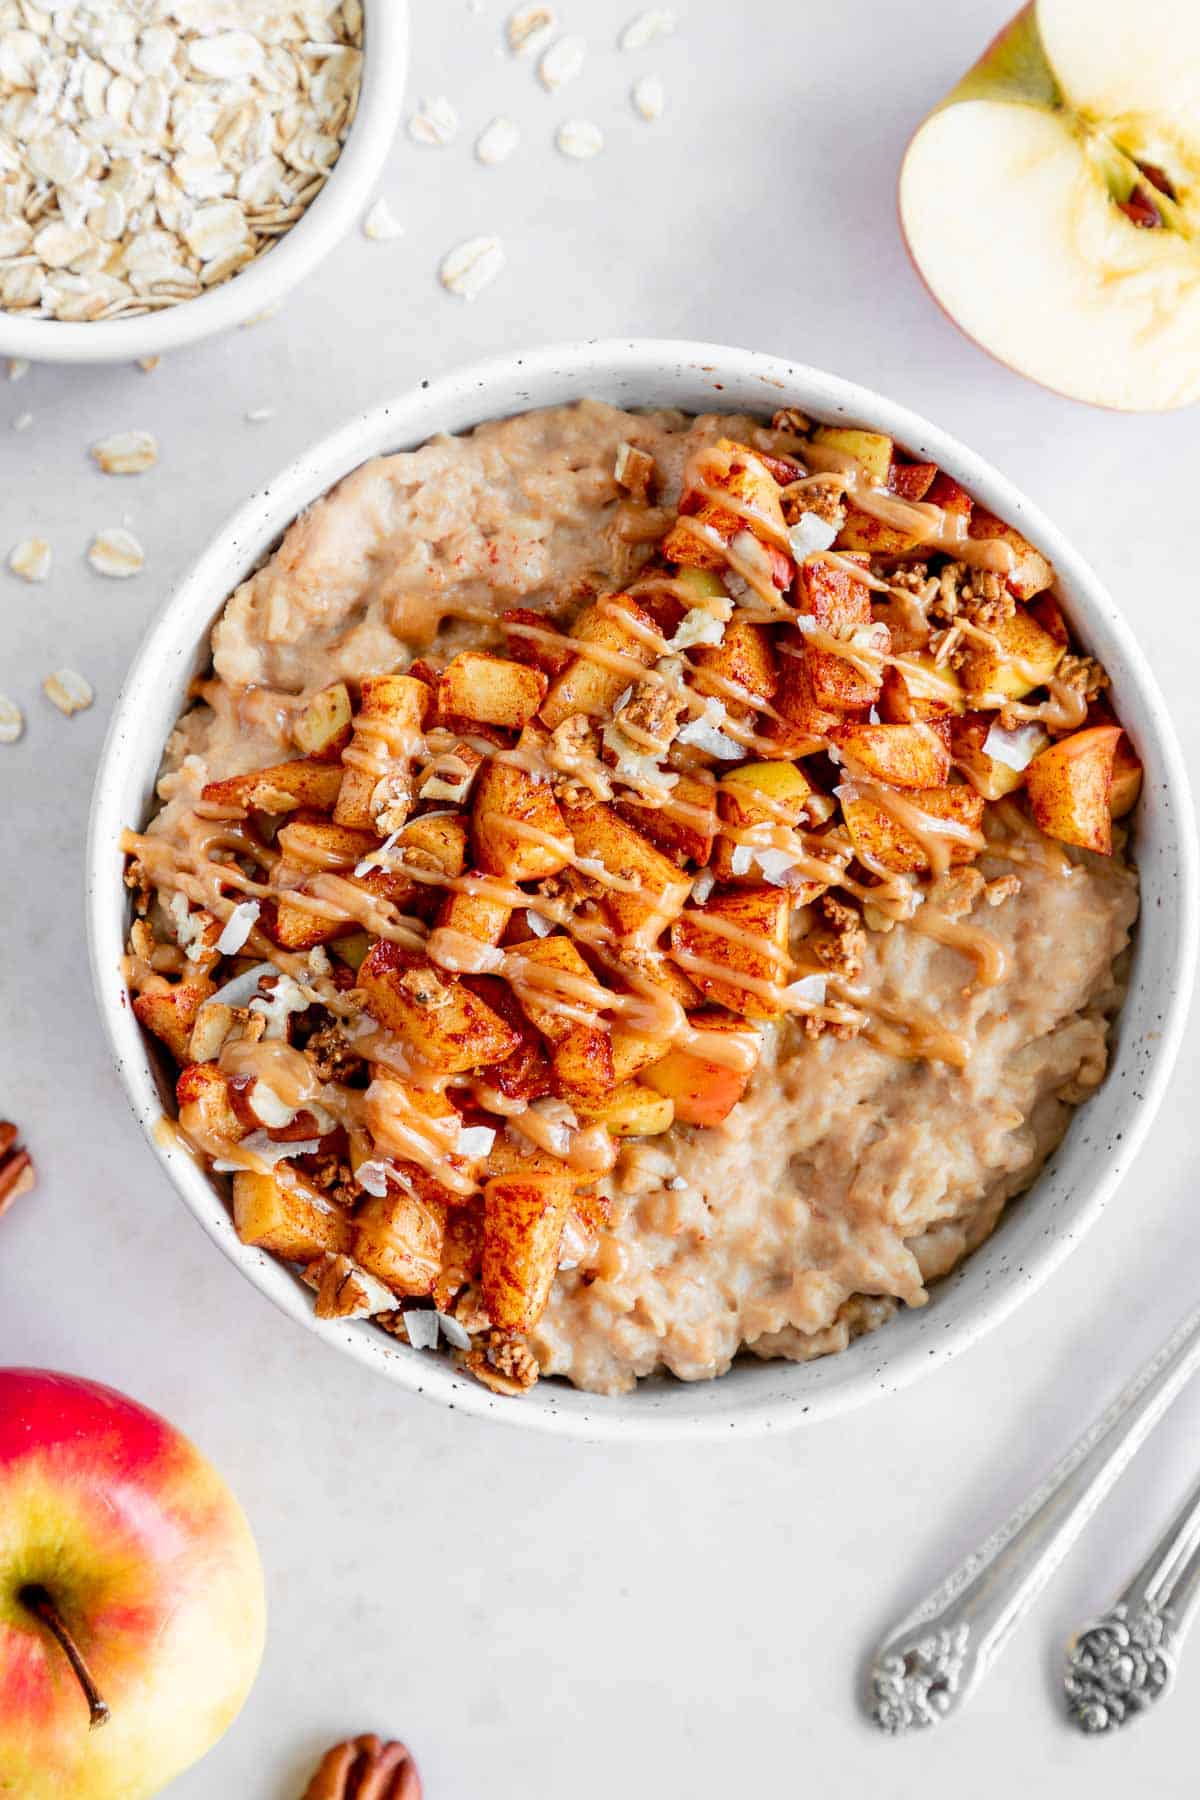 vegan caramel apple oatmeal in a bowl with caramelized apples and healthy caramel sauce on top